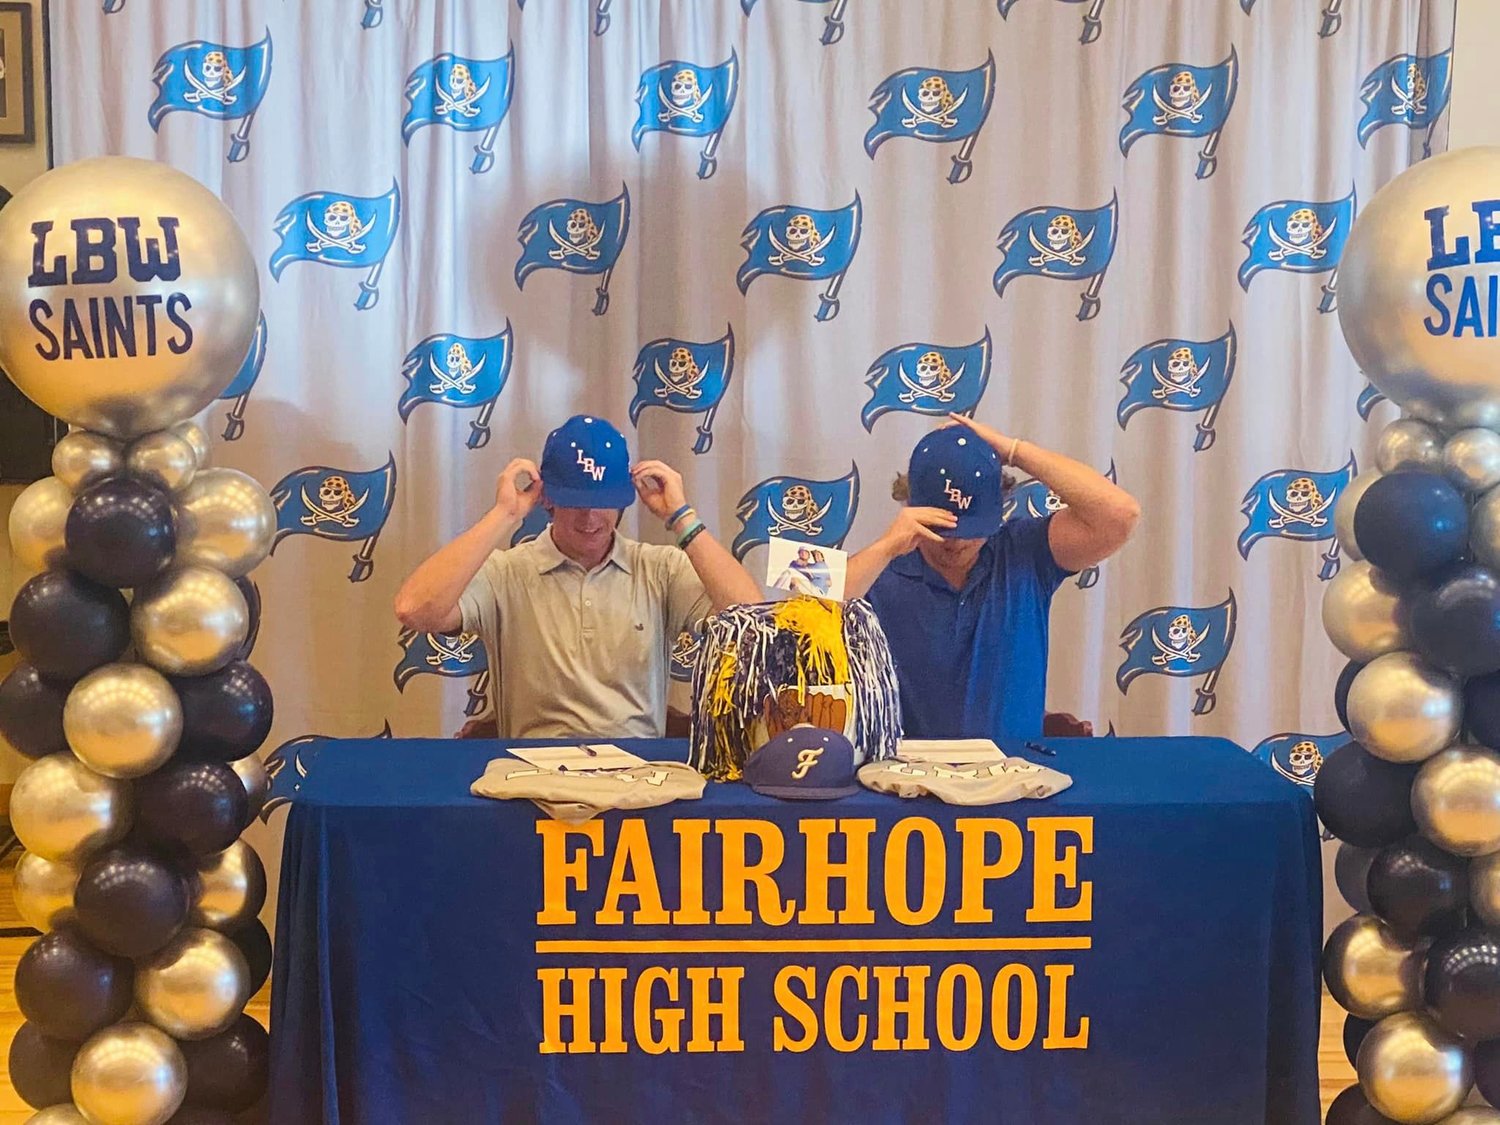 Fairhope seniors Hollon Brock and Jackson Hatcher don the cap of their college team after signing with the Lurleen B. Wallace Saints during a ceremony Sunday, March 5. The pair helped the Pirates claim the Class 7A Area 2 title last season with an 8-1 record in the group.